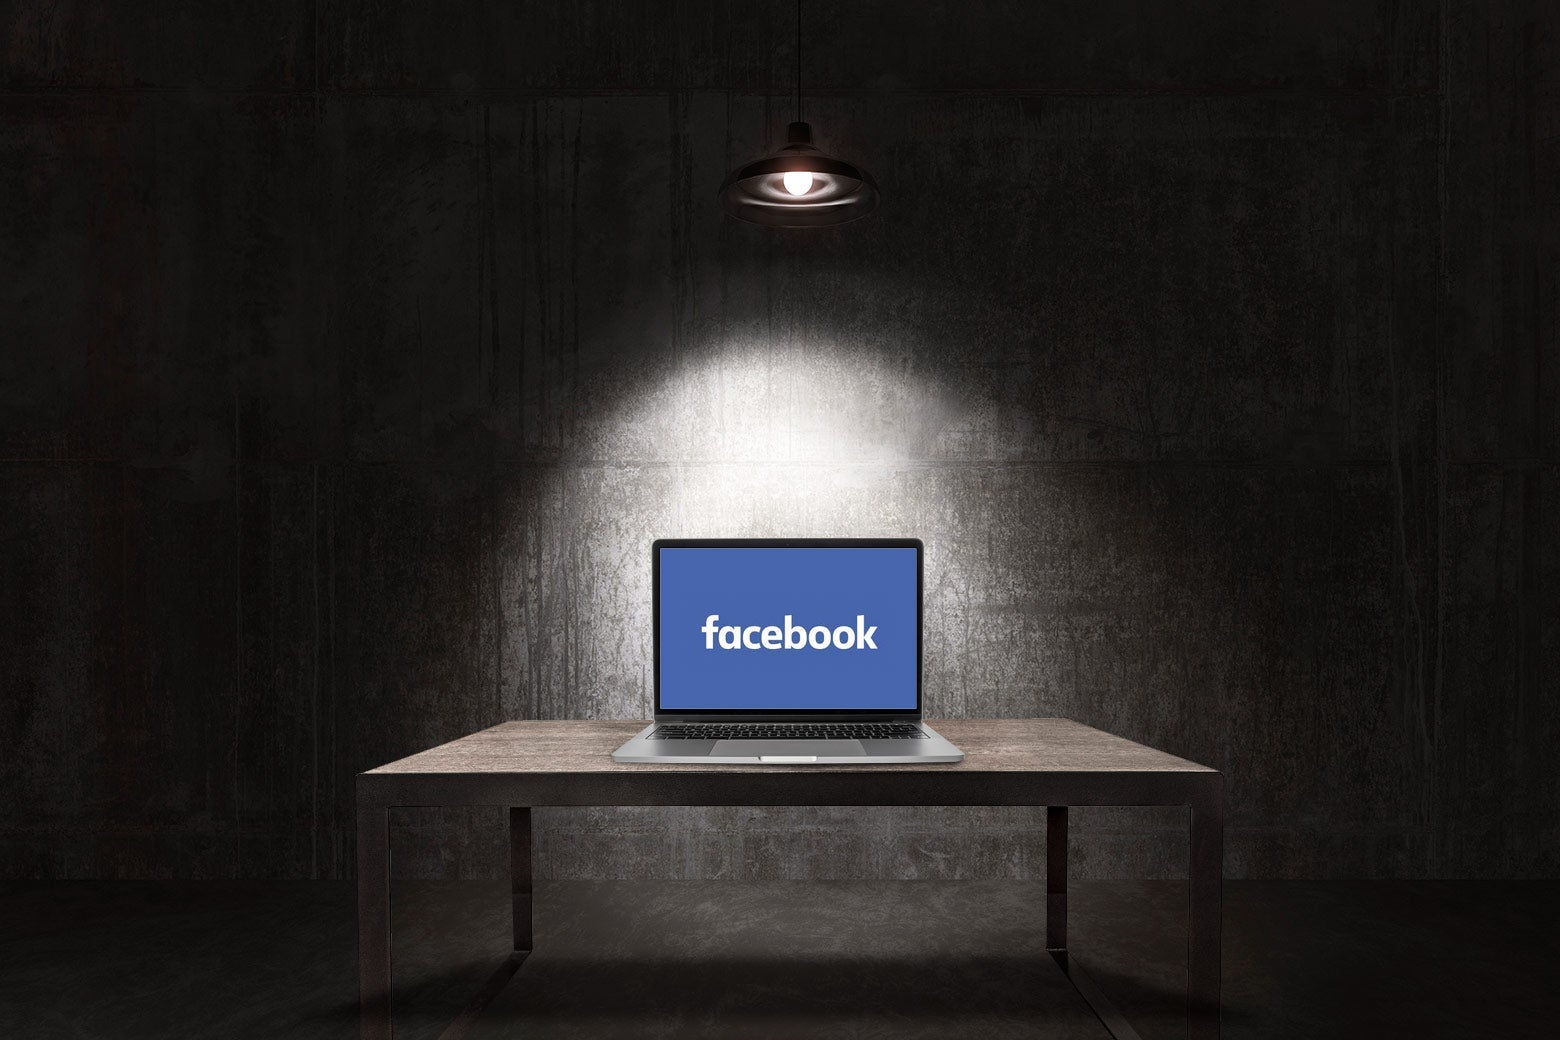 A laptop, open to a screen that shows the word Facebook on a blue background, sits on a table in a darkened interrogation room.